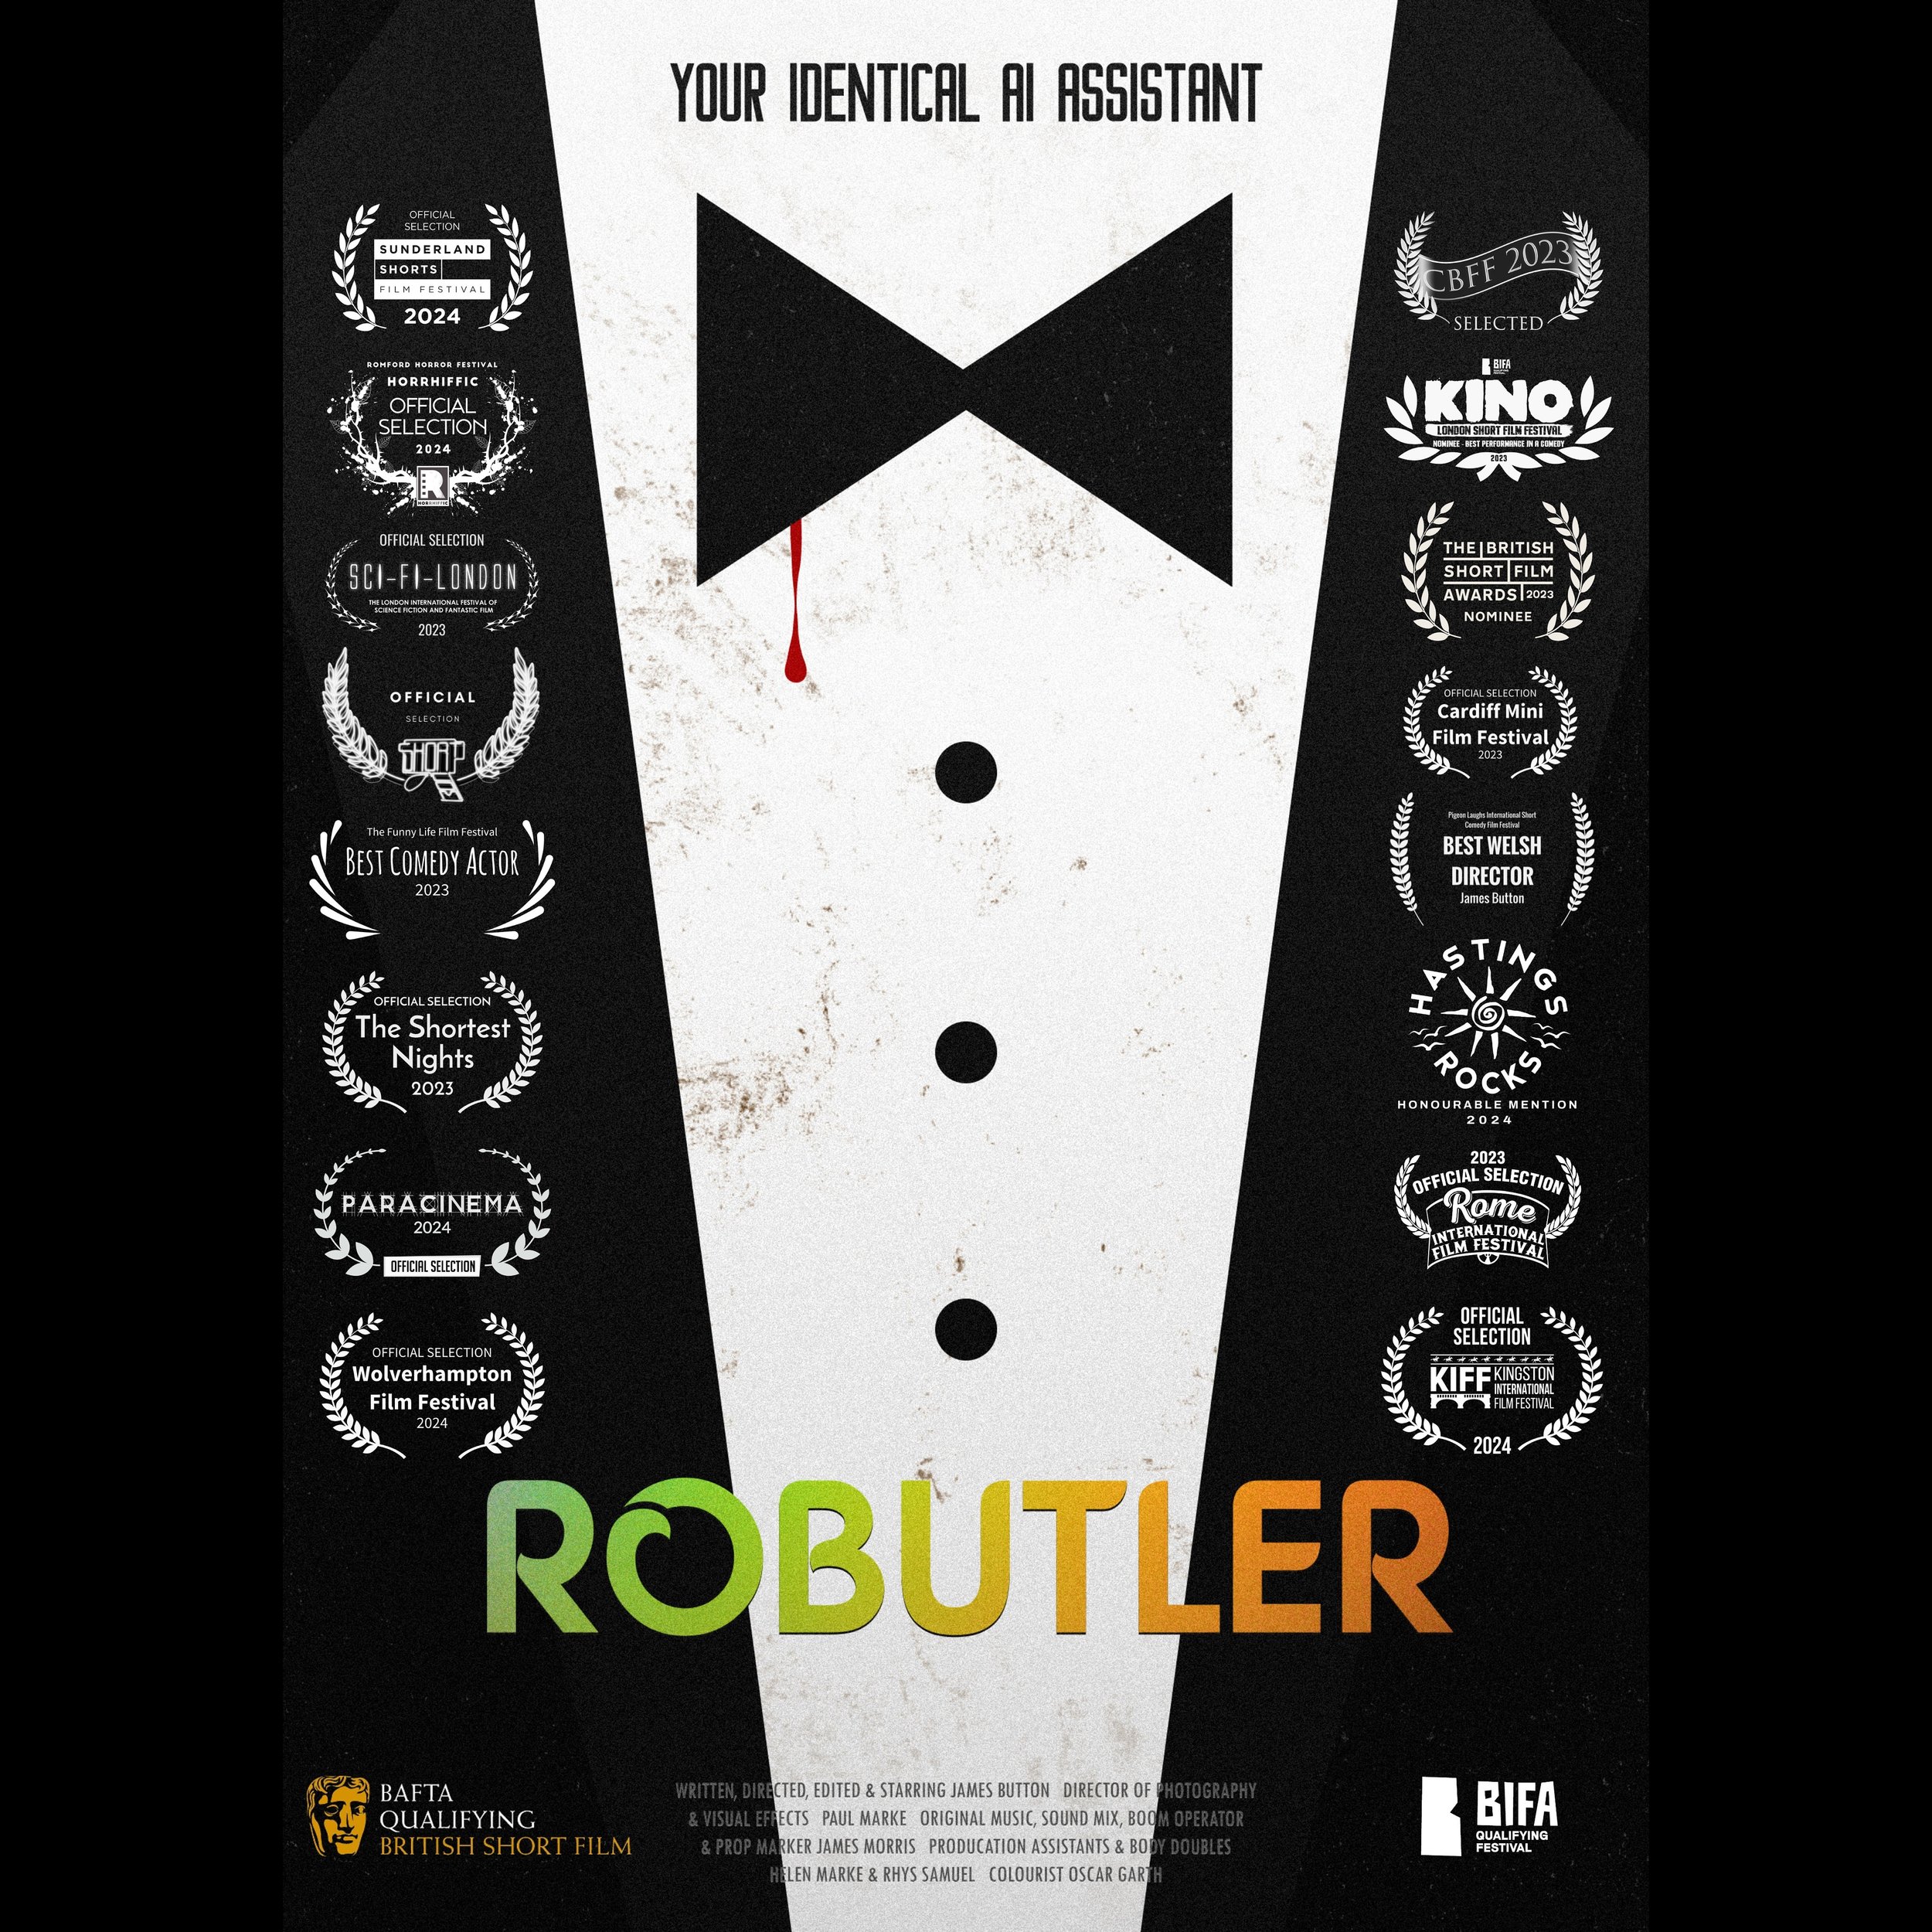 &ldquo;I am RoButlerrrrrrrrr!&rdquo;🤵🏻&zwj;♂️
Two more official selections at festivals this week for this one- popped the two new badges at the bottom of RoButler&rsquo;s laurel-loaded tux there and now he looks even more like the keen boy scout h